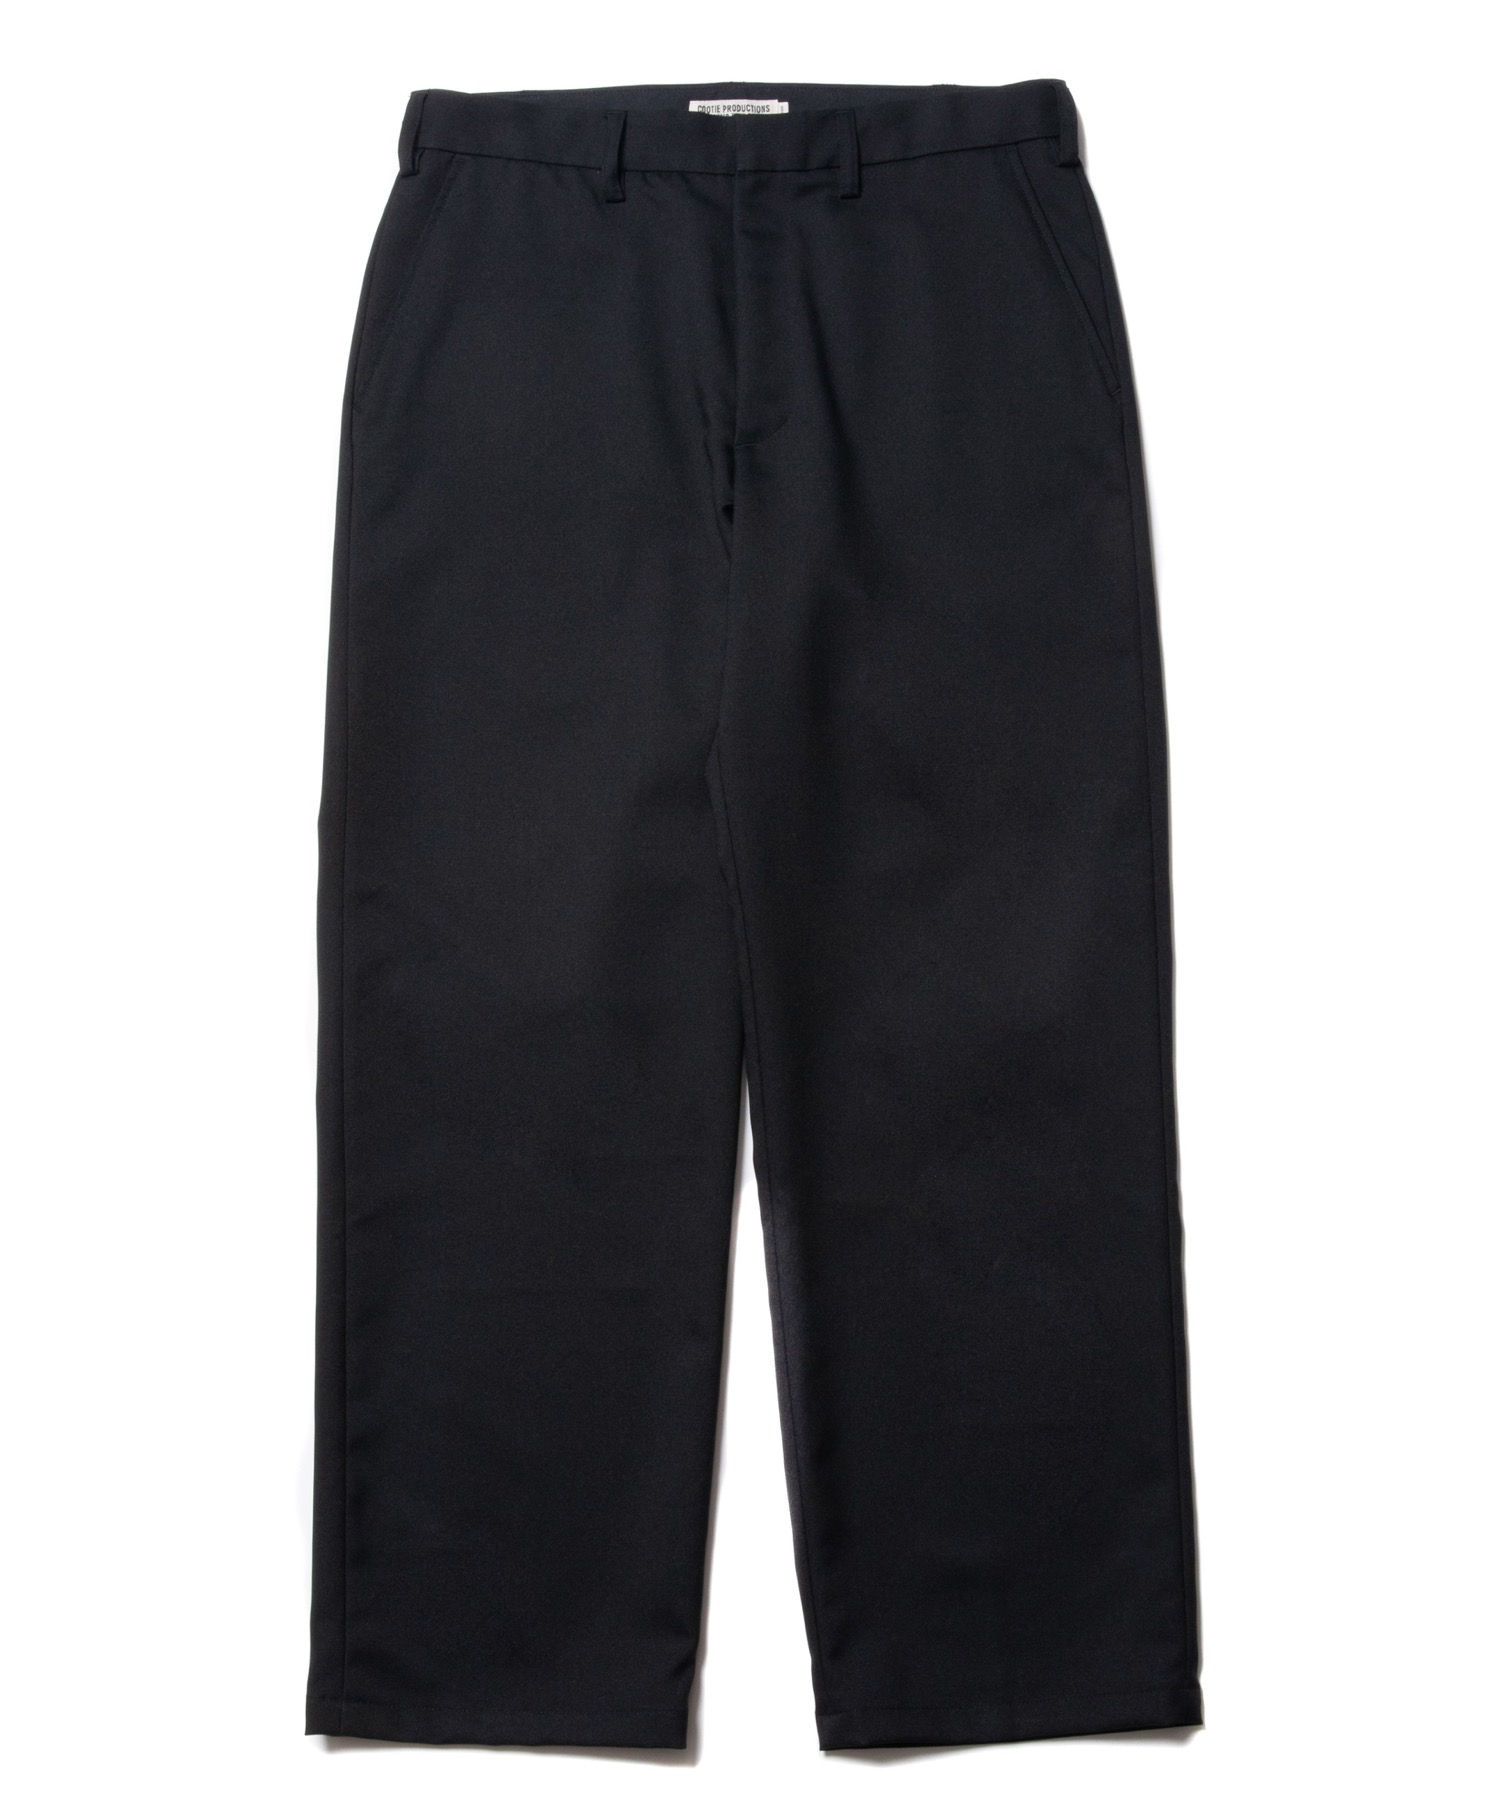 COOTIE お1人様1点限り PRODUCTIONSPolyester Trousers Twill 最大41%OFFクーポン